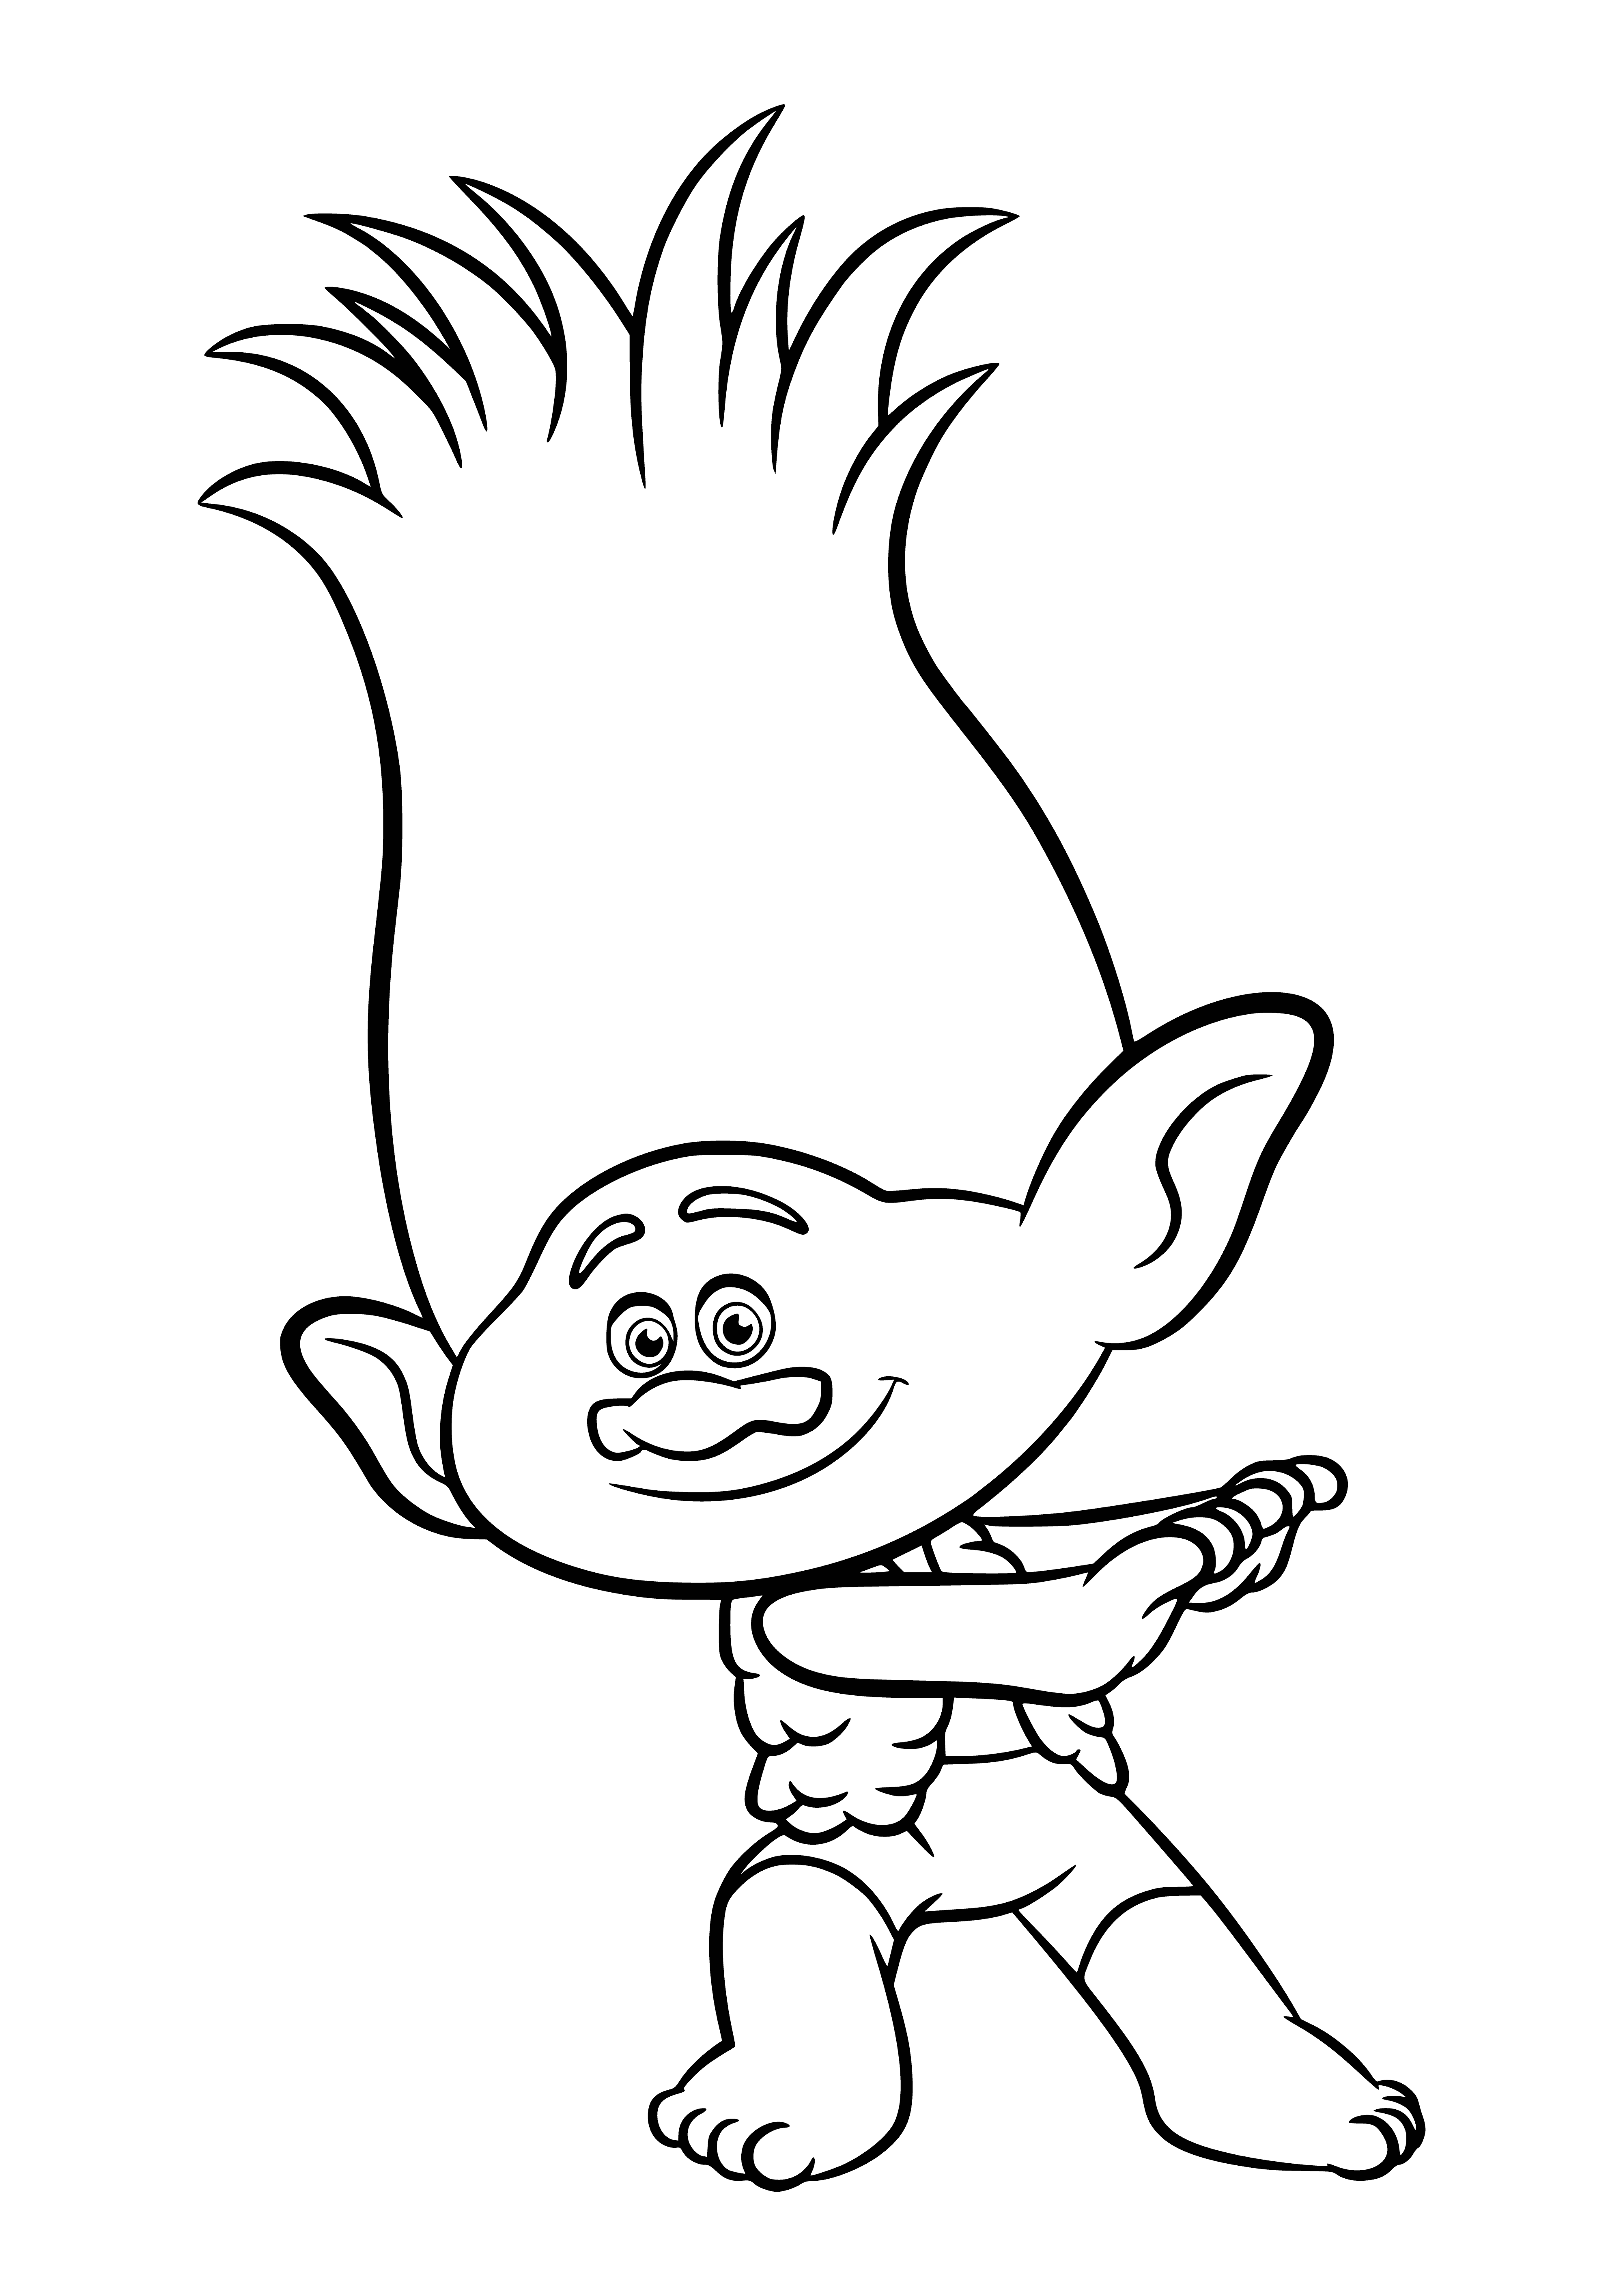 coloring page: A big green troll with a purple scarf and orange spikes is surrounded by a joyful, multi-colored array of trolls, each with its own unique look. #trolltown